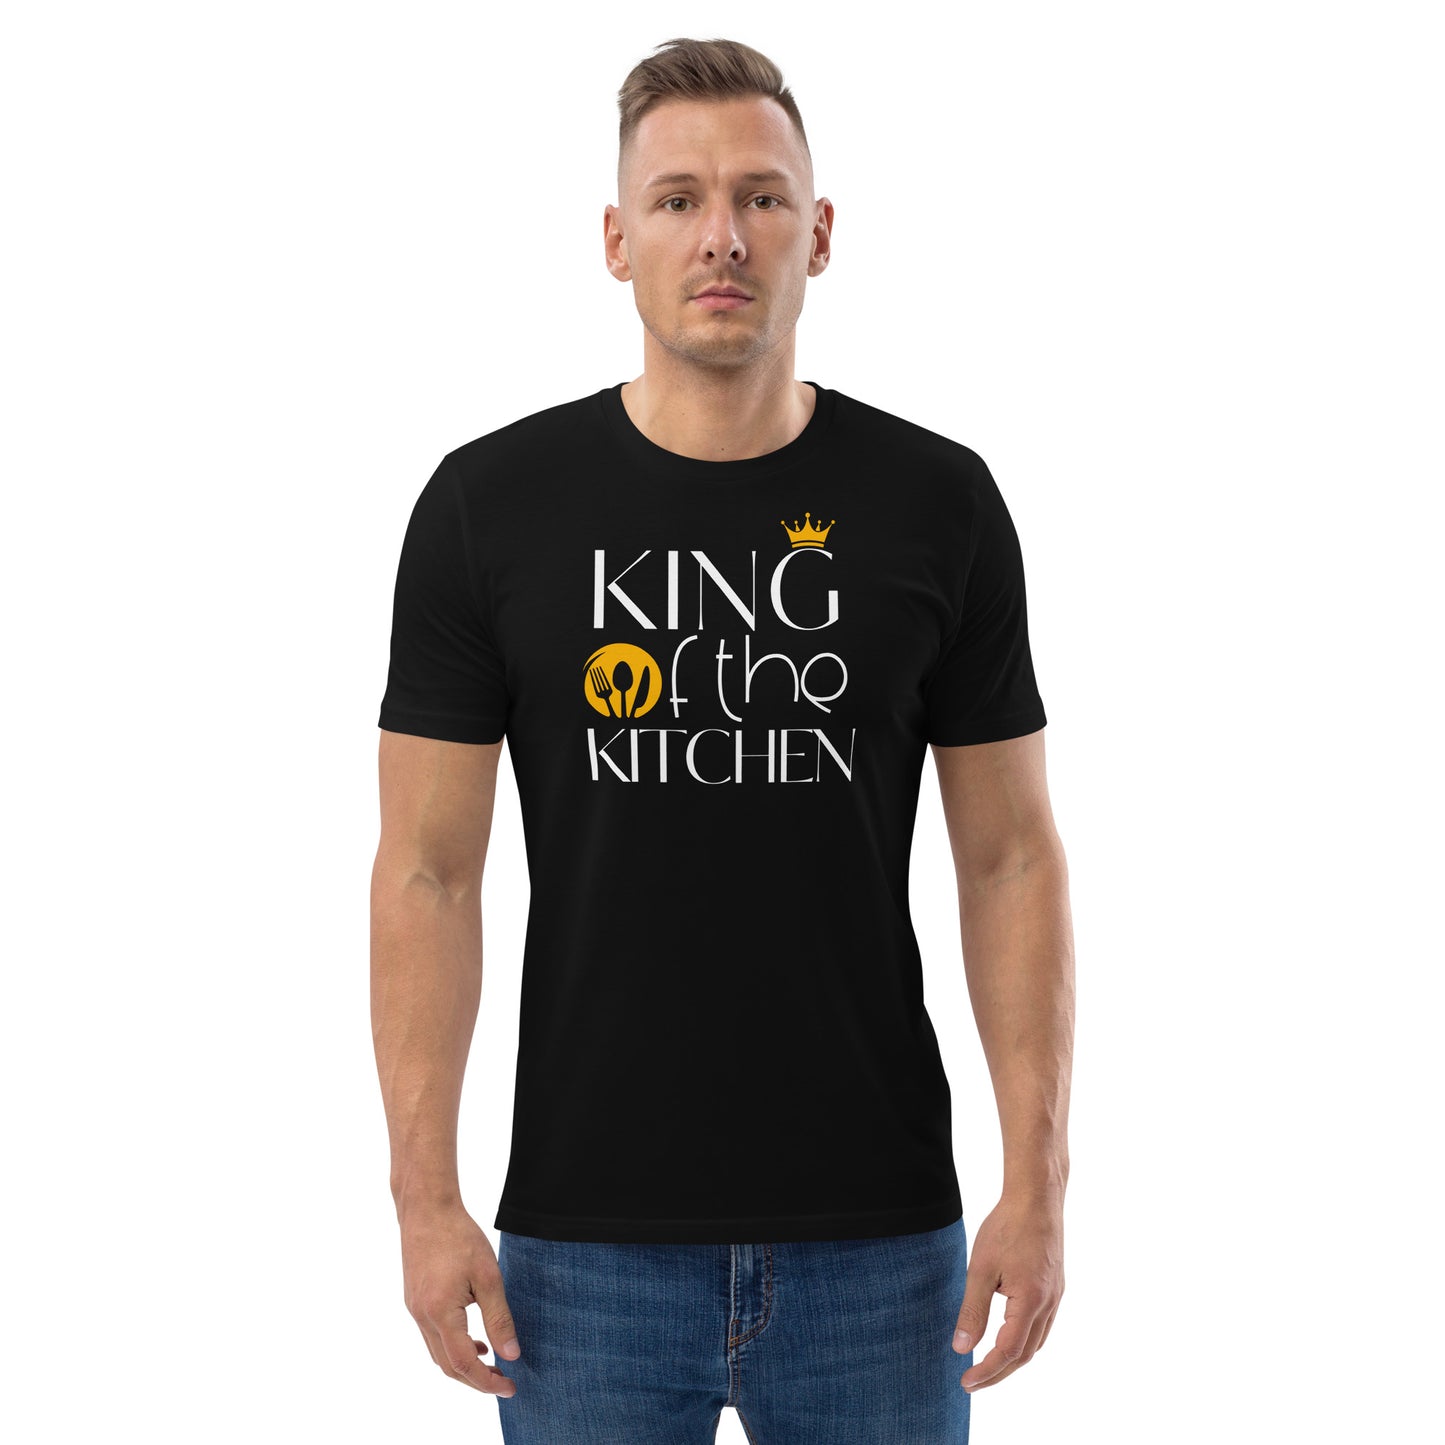 "King of the kitchen" custom made T-Shirt fpr Hobby Chefs, in black